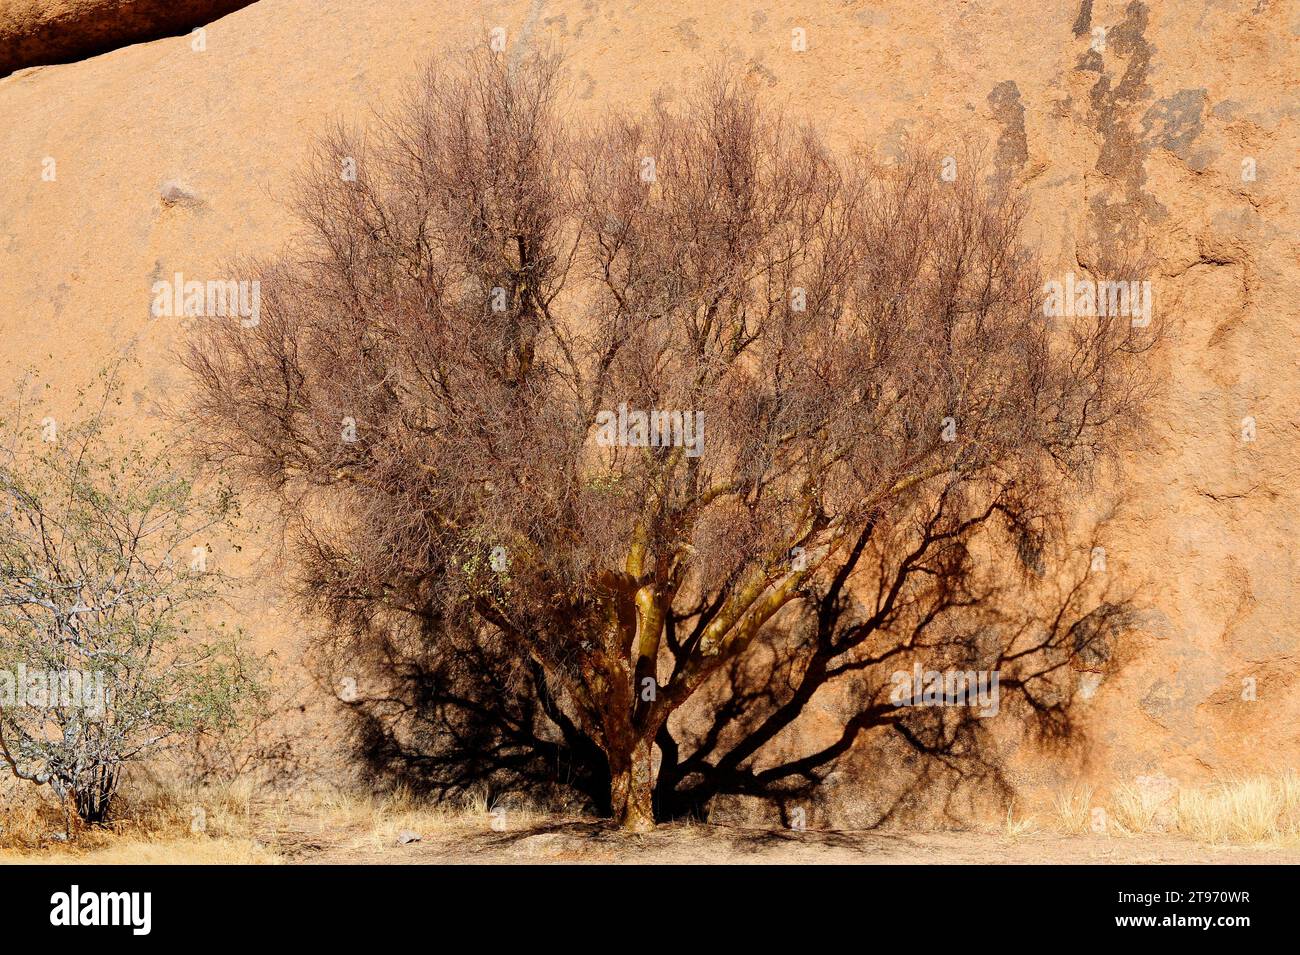 Blue-leaved corkwood (Commiphora glaucescens) is a little deciduous tree of the Burseraceae family. This photo was taken in Spitzkoppe, Namibia. Stock Photo